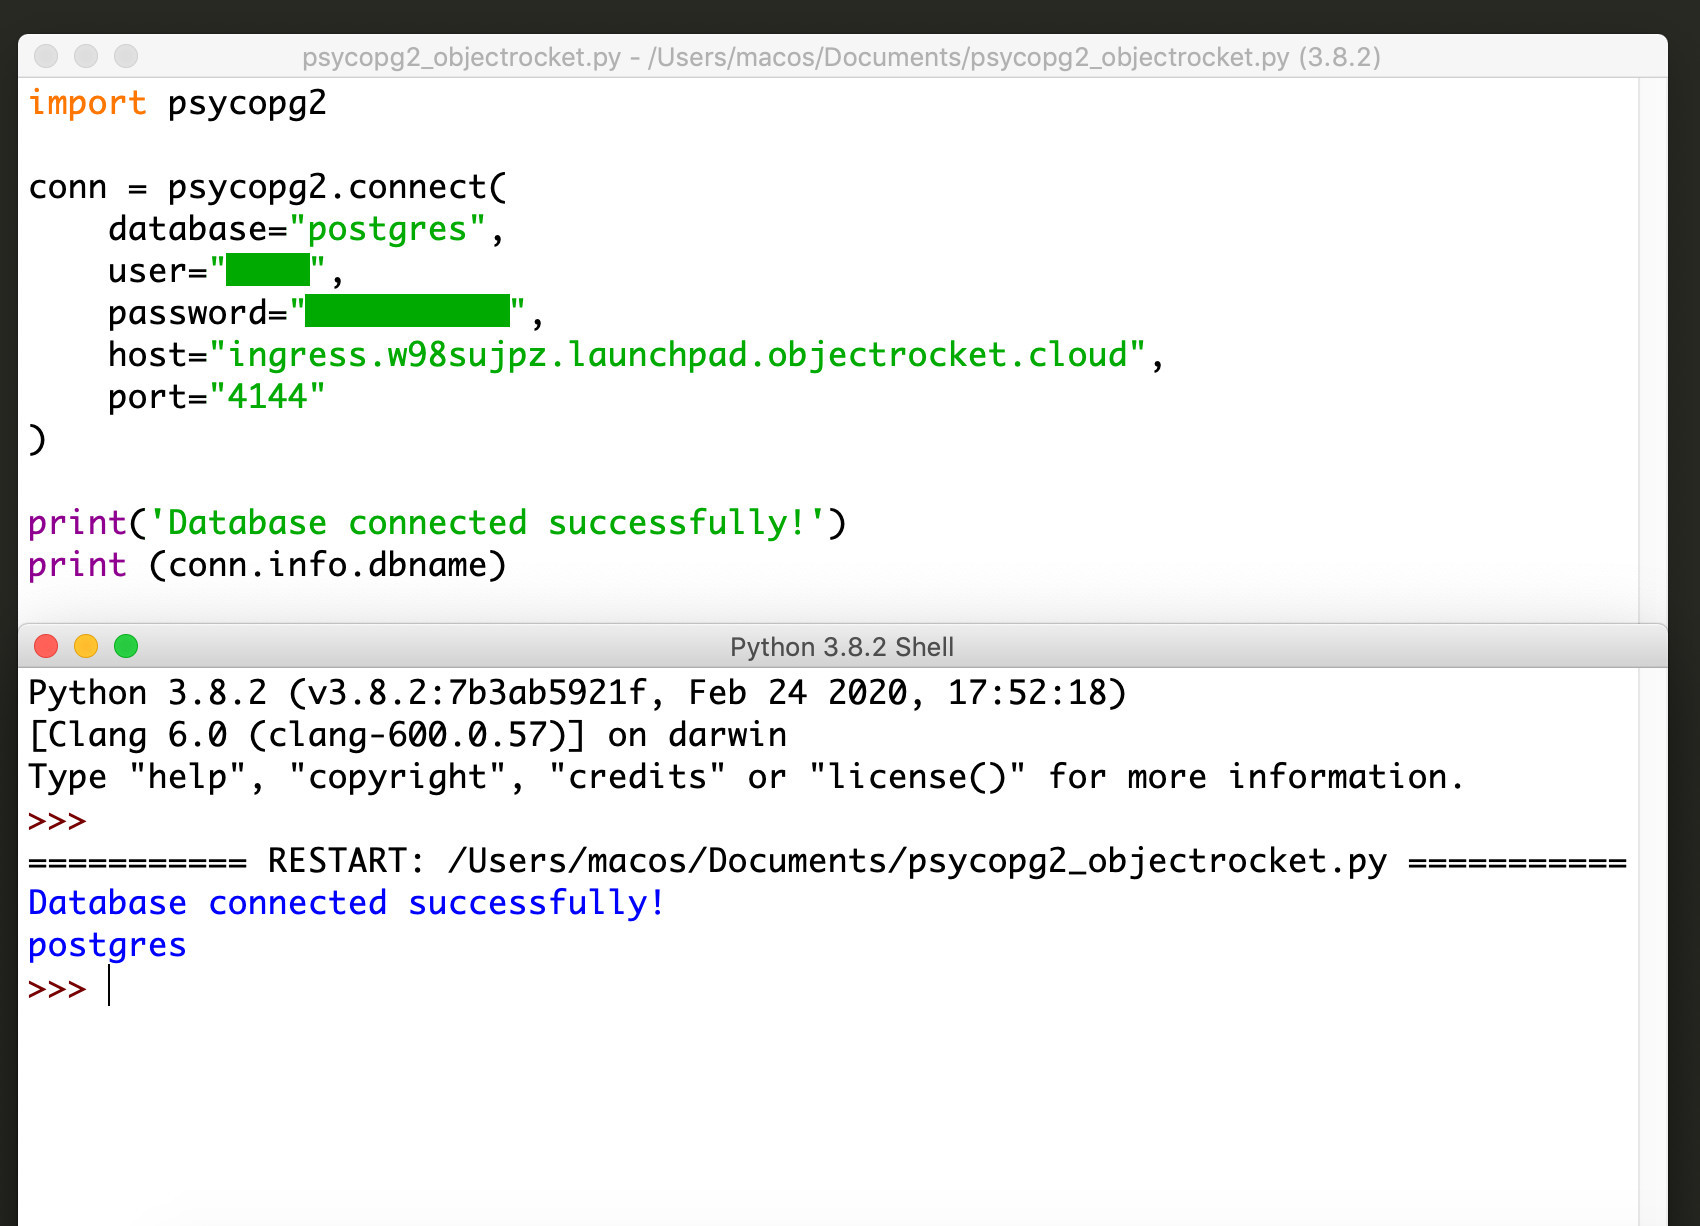 Screenshot of a PostgreSQL connect to python for an ObjectRocket instance example